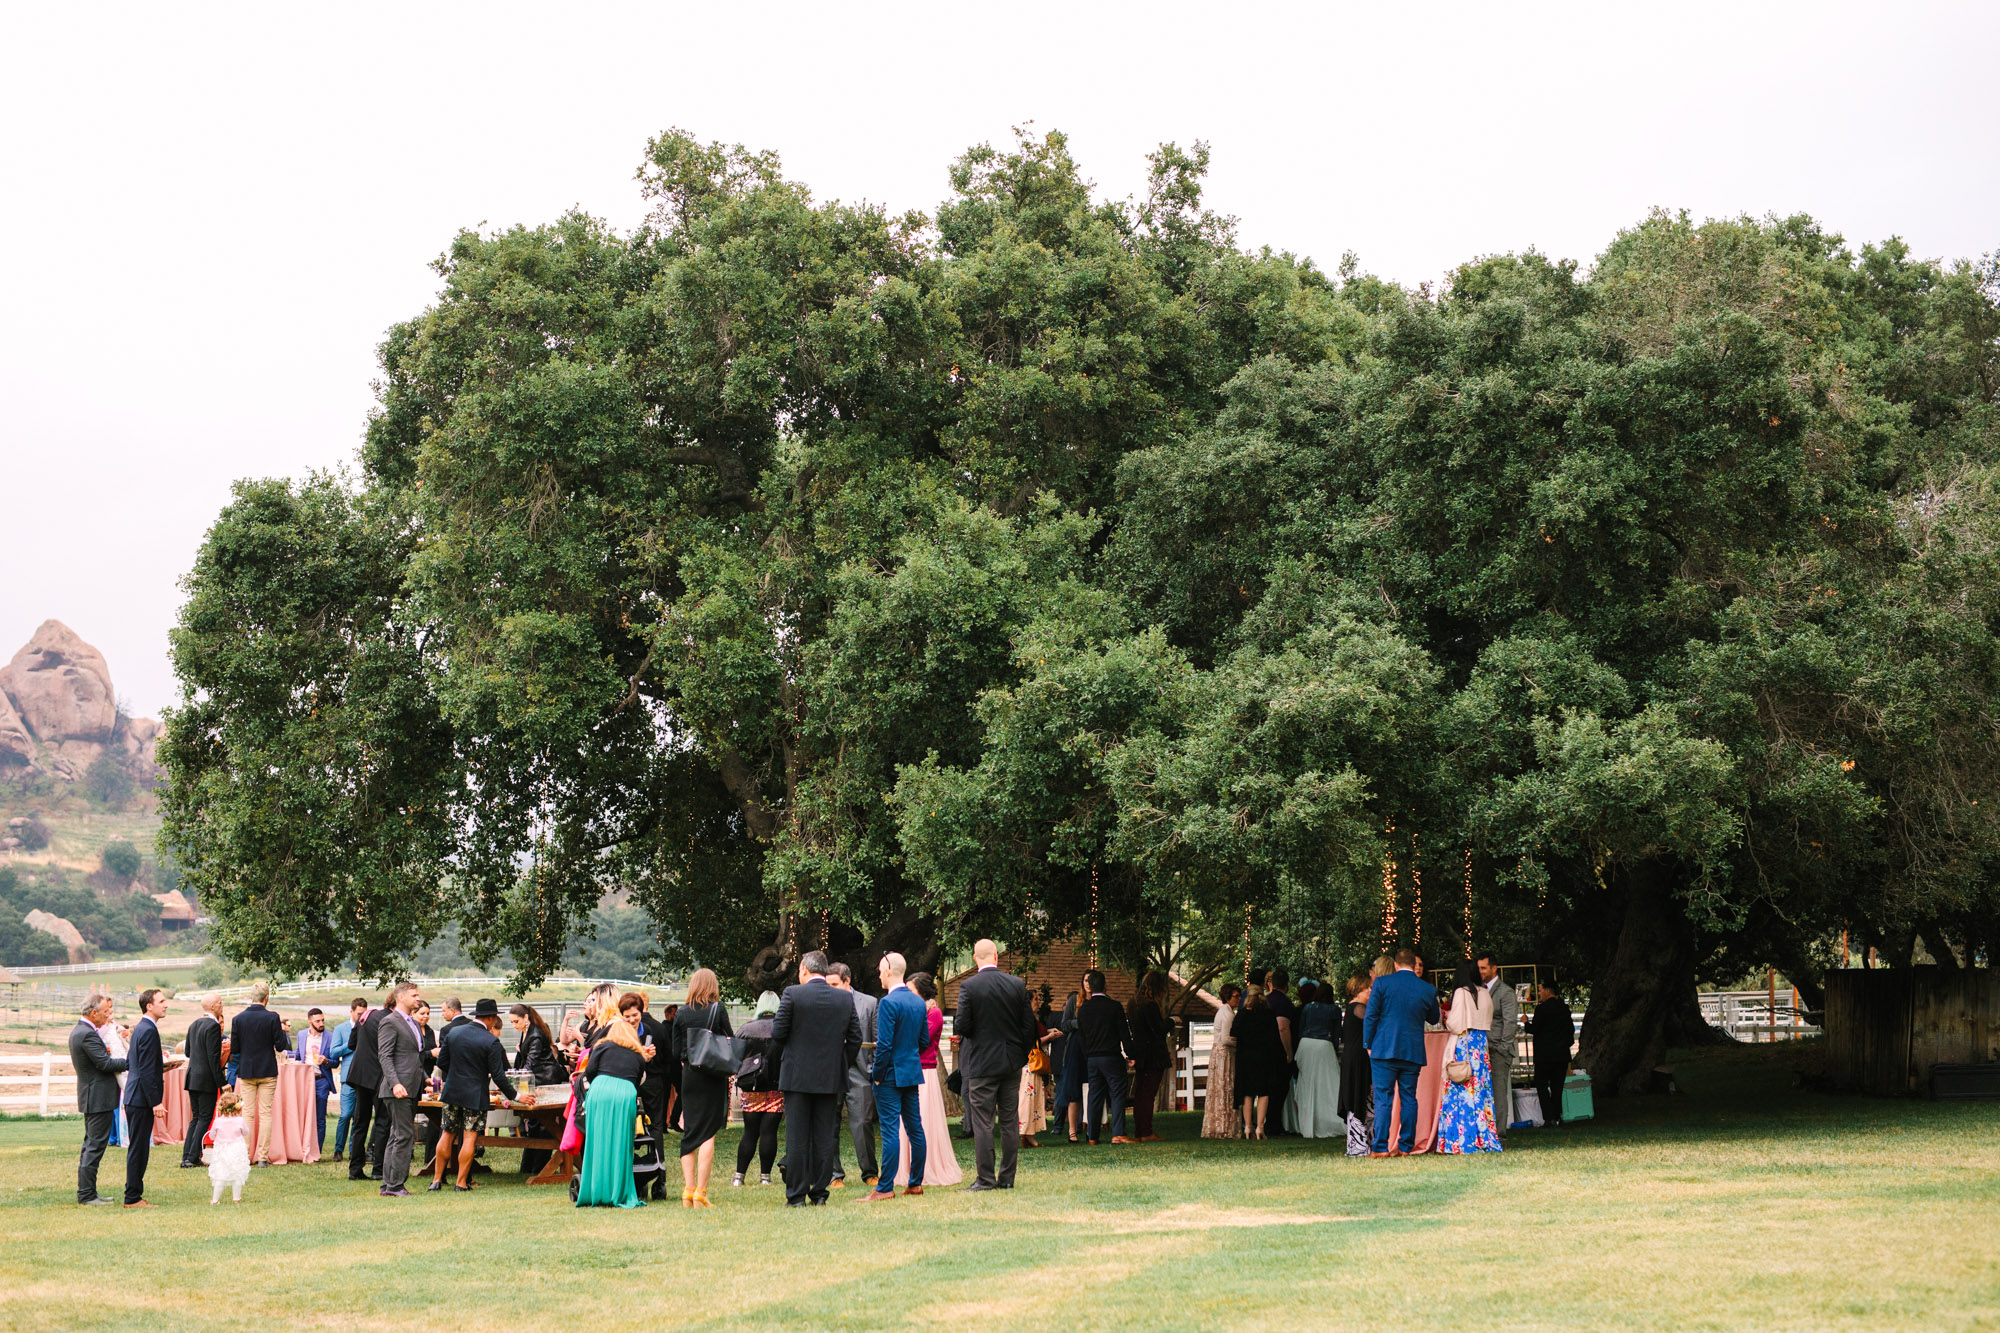 Wedding reception at Saddlerock Ranch by Mary Costa Photography